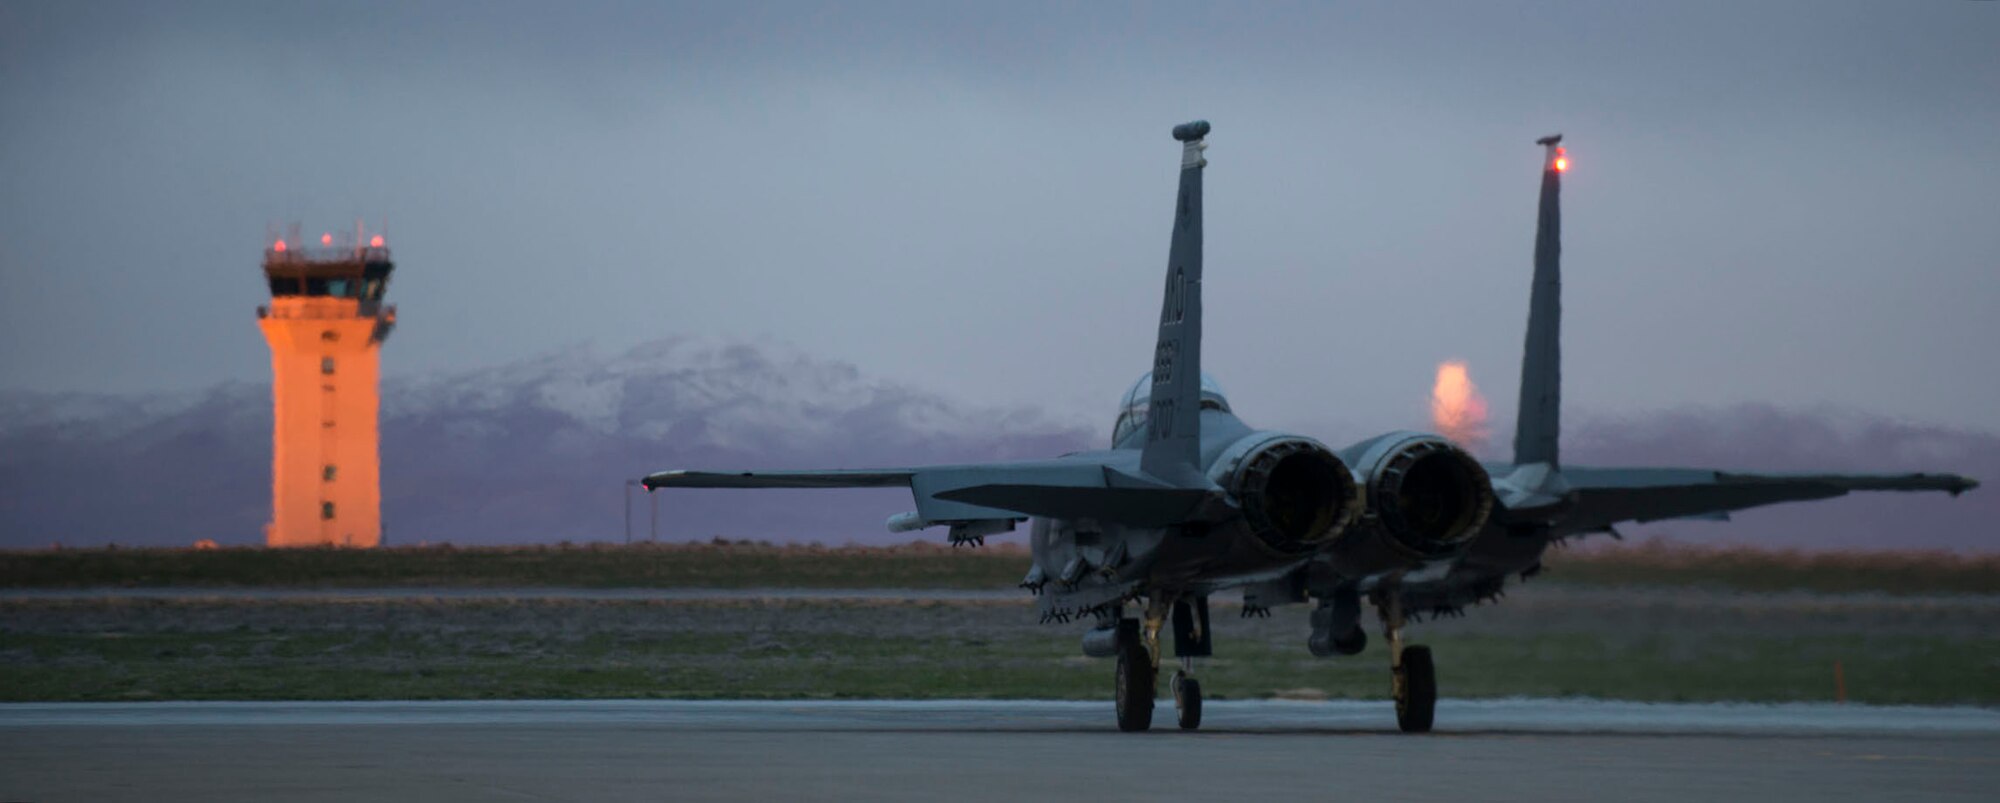 An F-15E Strike Eagle taxis to the runway March 15, 2016, at Mountain Home Air Force Base, Idaho. The F-15E was the first U.S. operational aircraft whose engines' thrust exceeded the plane's loaded weight, permitting it to accelerate even while in vertical climb. (U.S. Air Force photo by Senior Airman Malissa Lott/ RELEASED)